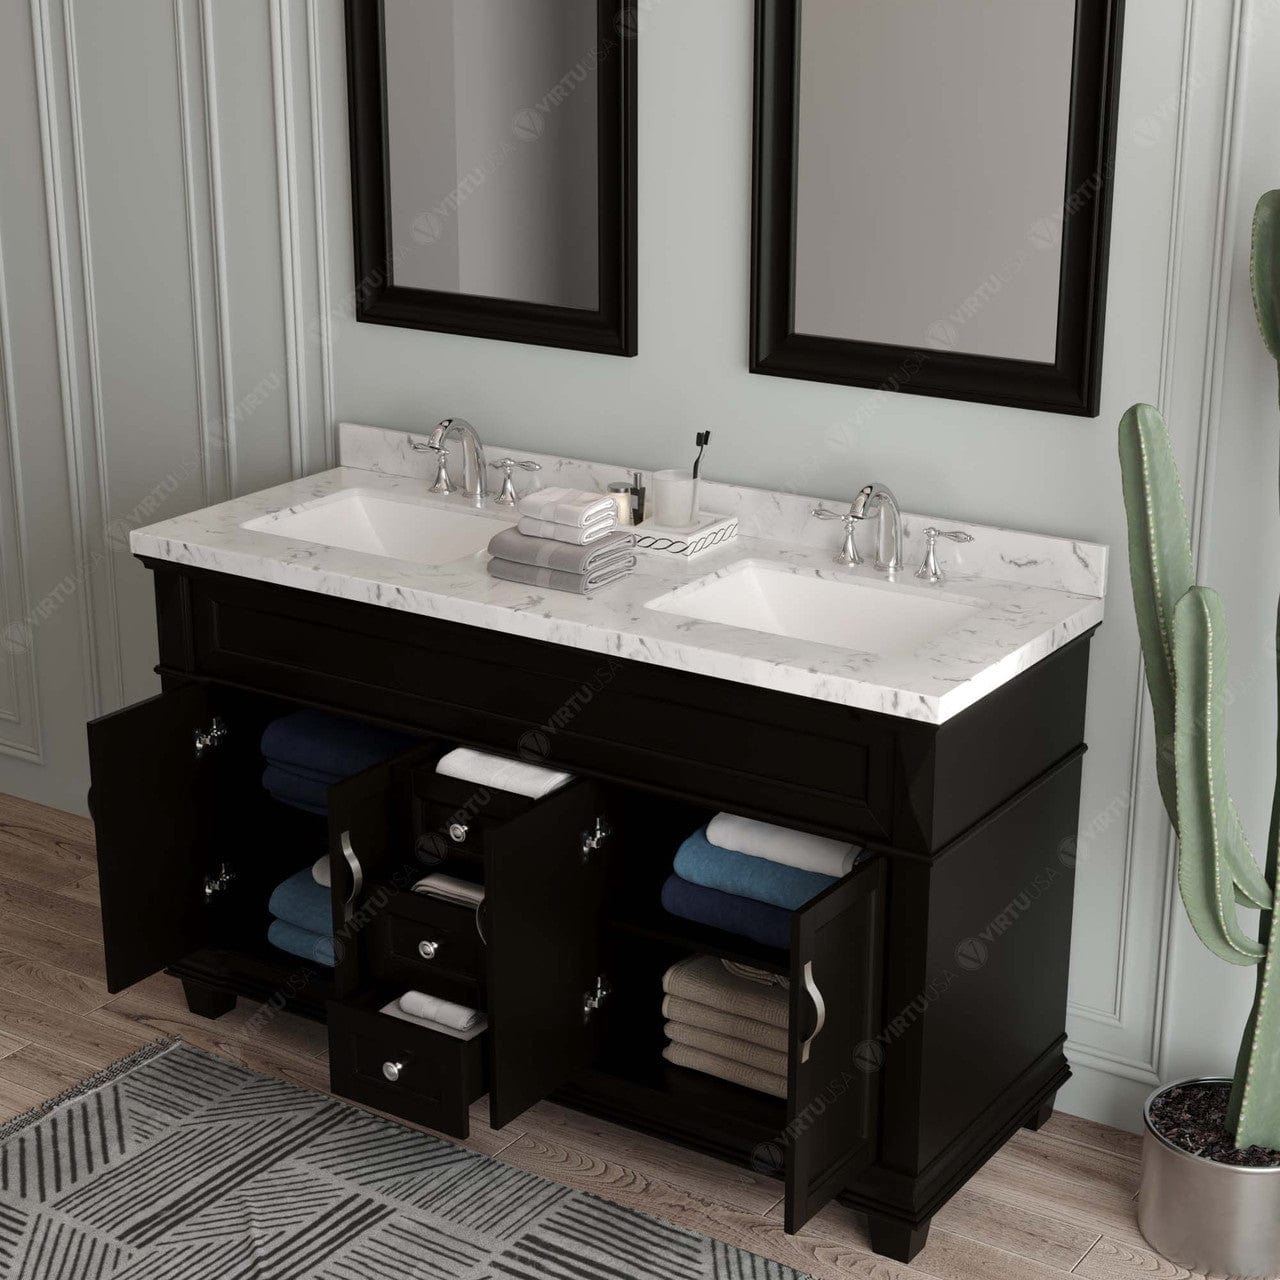 Victoria 60" Bath Vanity in Espresso with Cultured Marble Quartz Top by Virtu USA drawers open